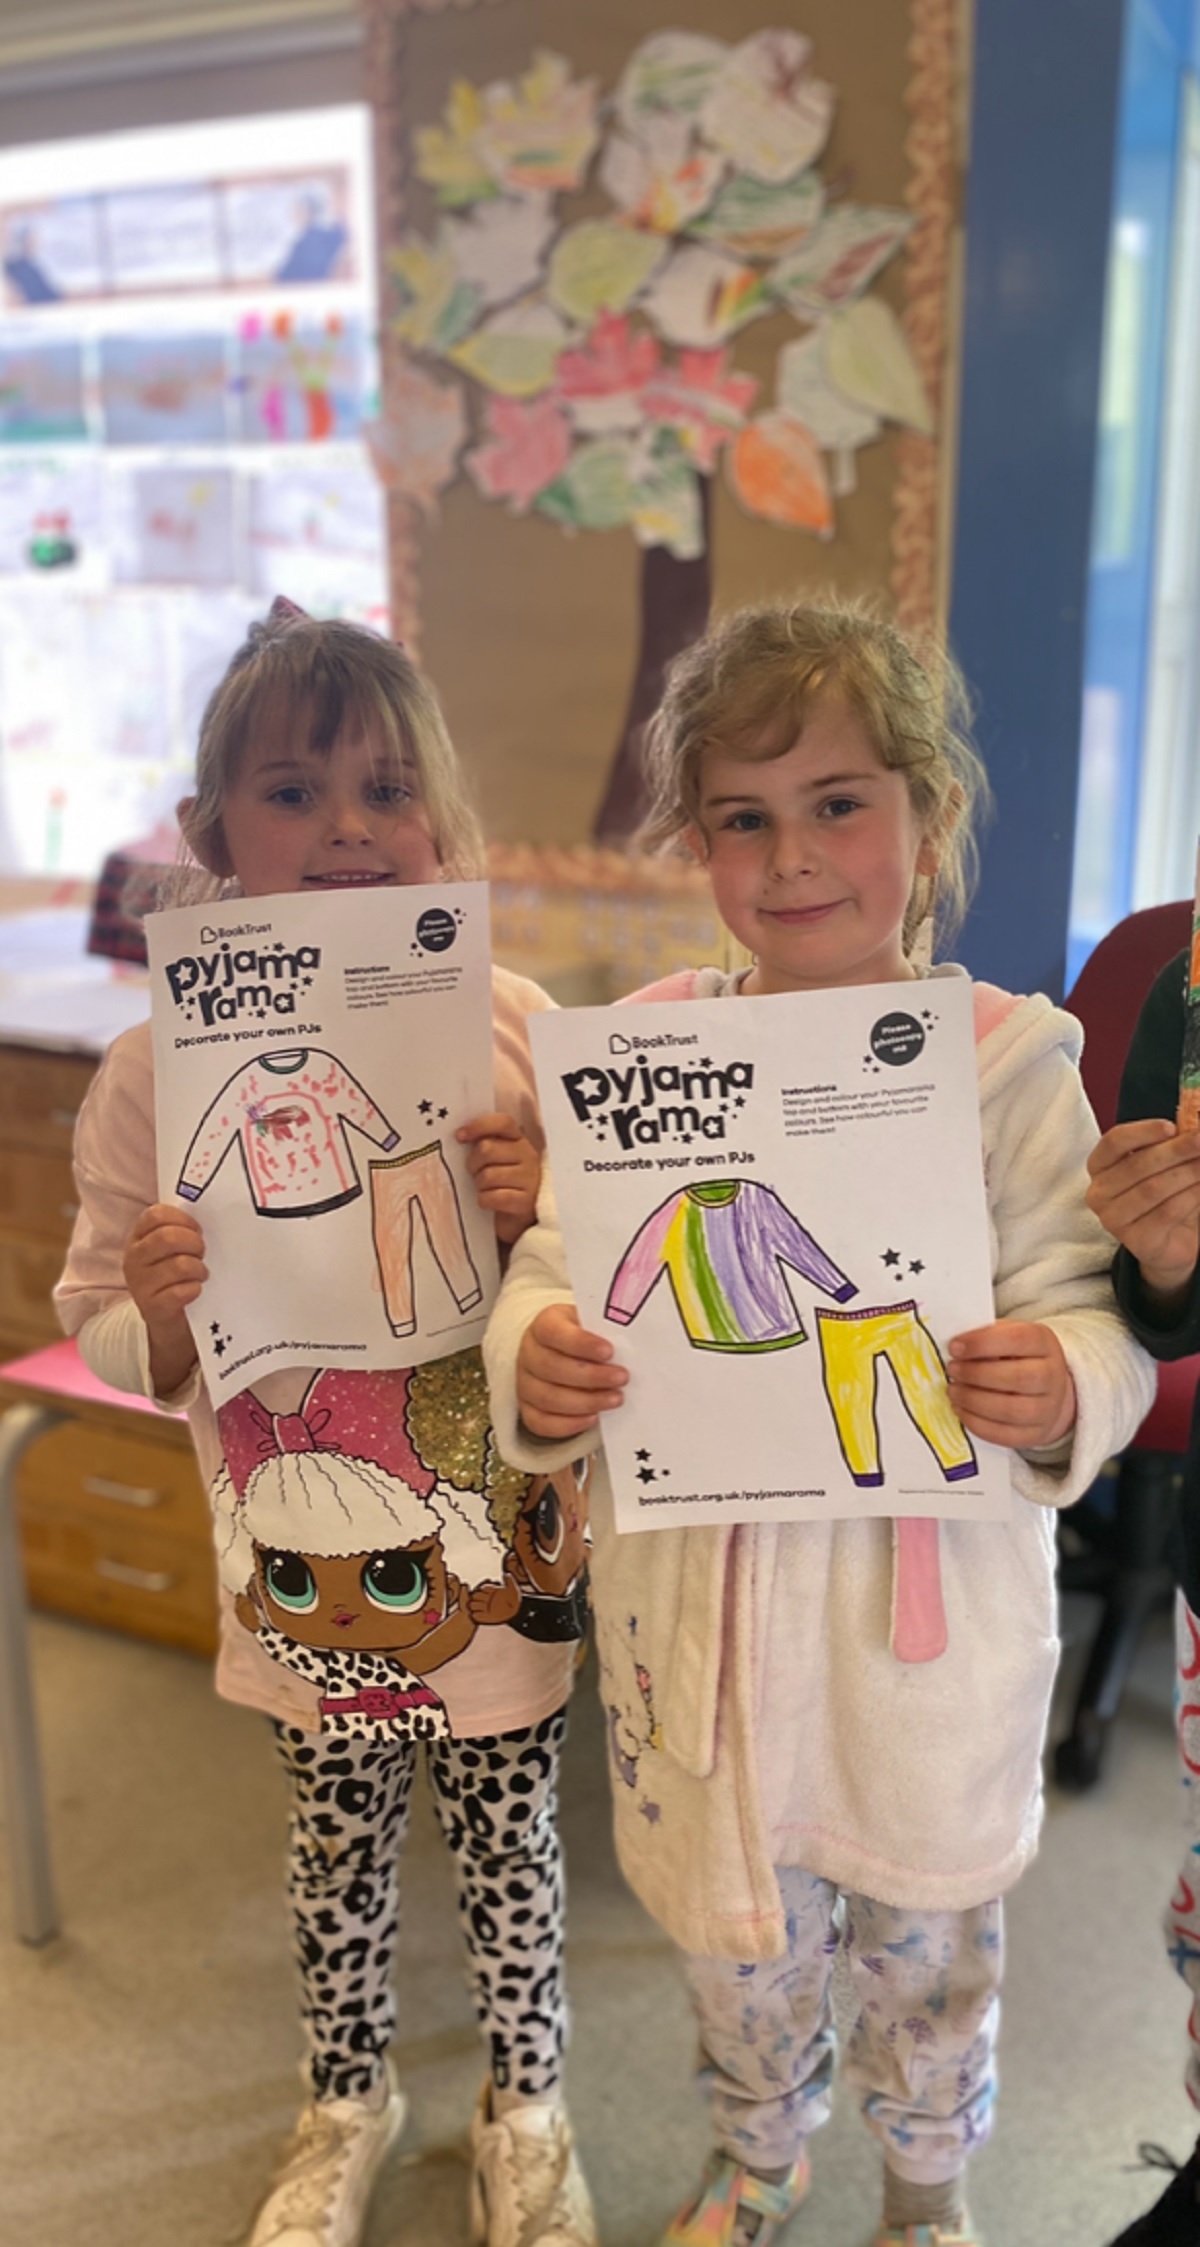 A scene of the times - Kaya Edwards and Amelie Bretton designed new pyjamas as one of the activities developed by the Book Trust charity